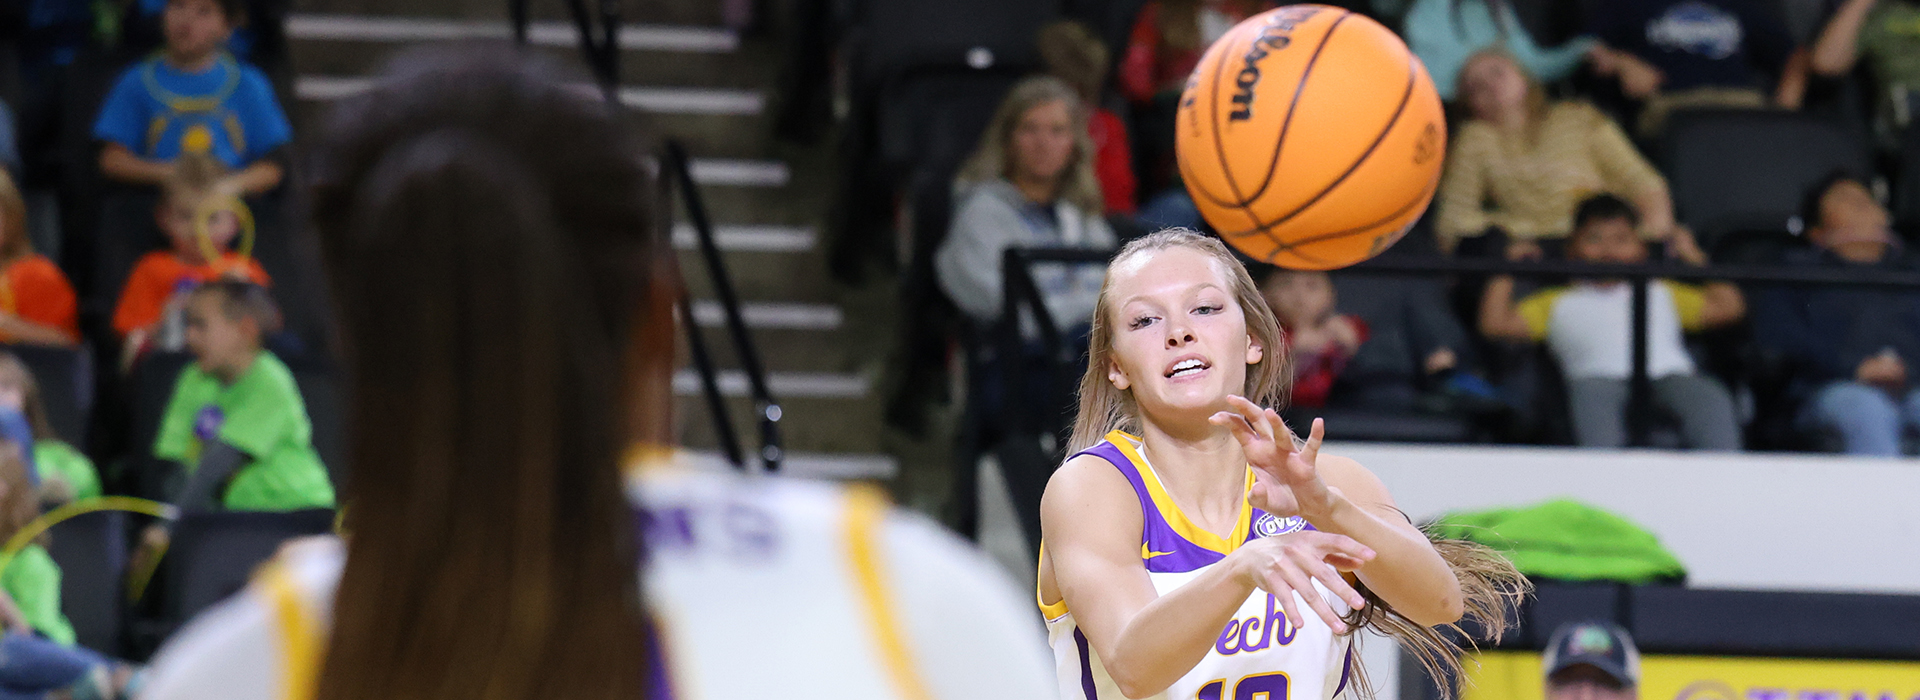 Golden Eagle women open Louisiana swing with Saturday visit to ULM